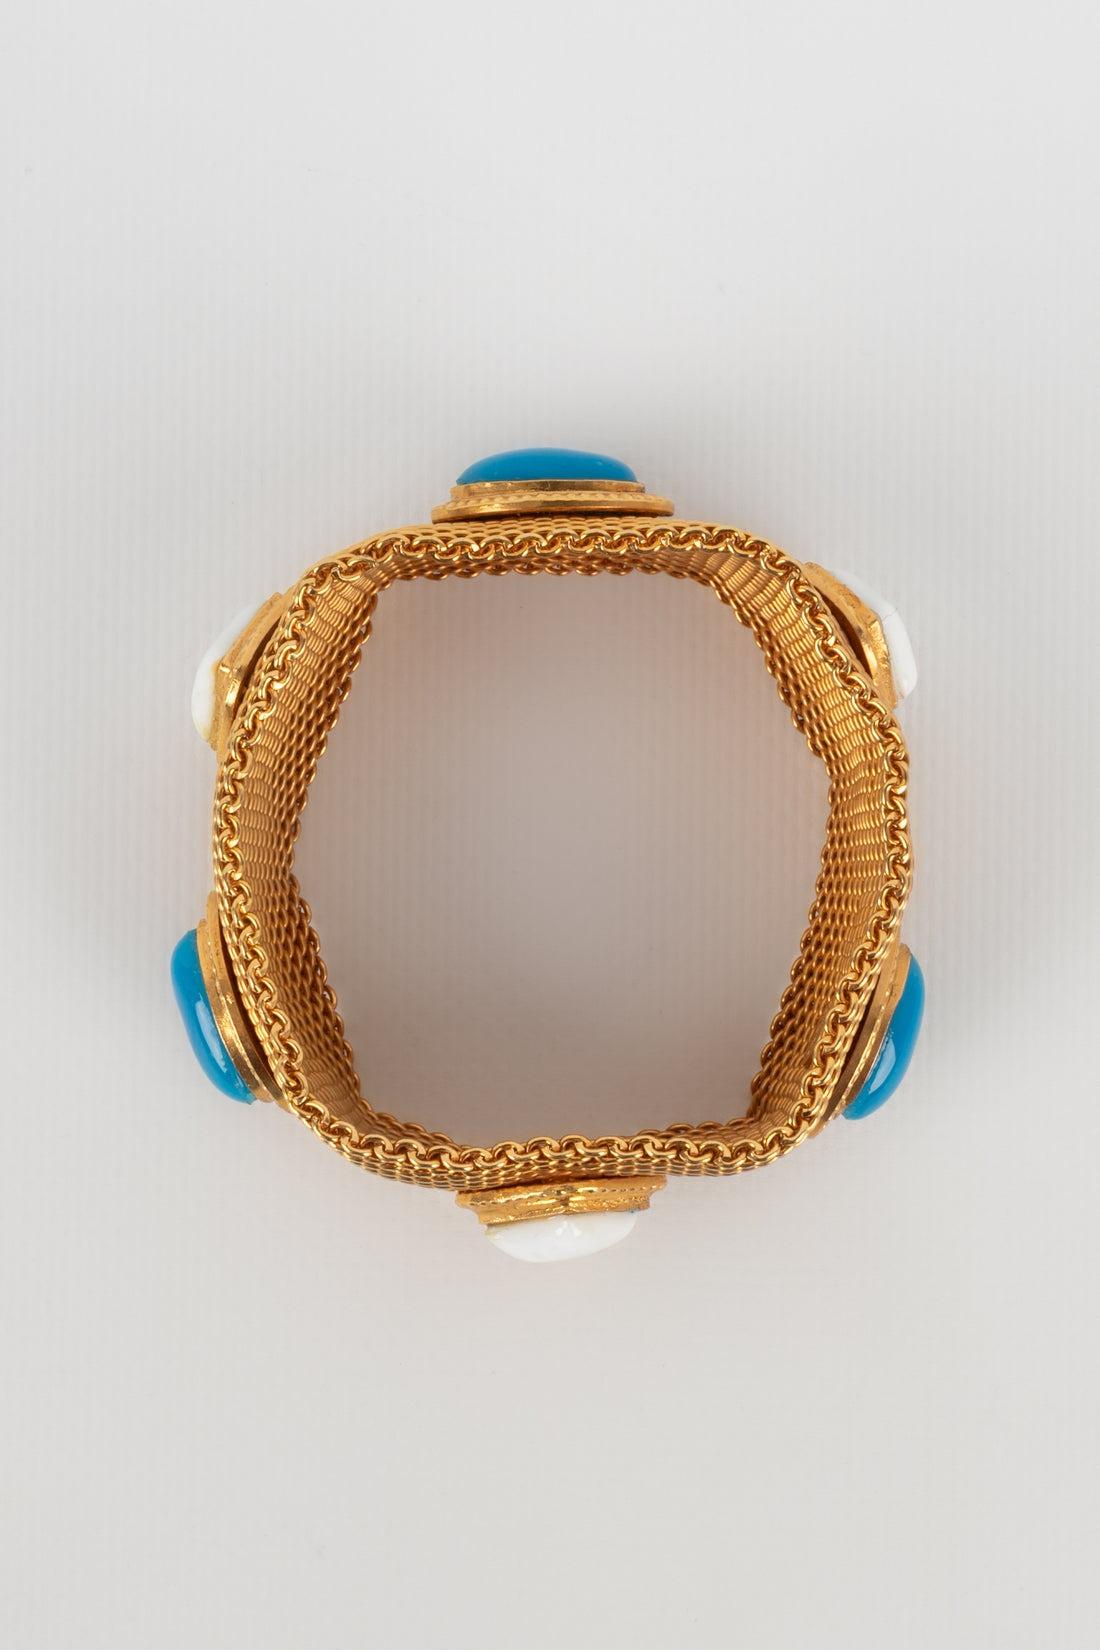 Chanel - (Made in France) Chanel golden metal bracelet with glass paste. Spring-Summer 1997 Collection.

Additional information:
Condition: Very good condition
Dimensions: Circumference: 20 cm
Period: 20th Century

Seller Reference: BRA164
